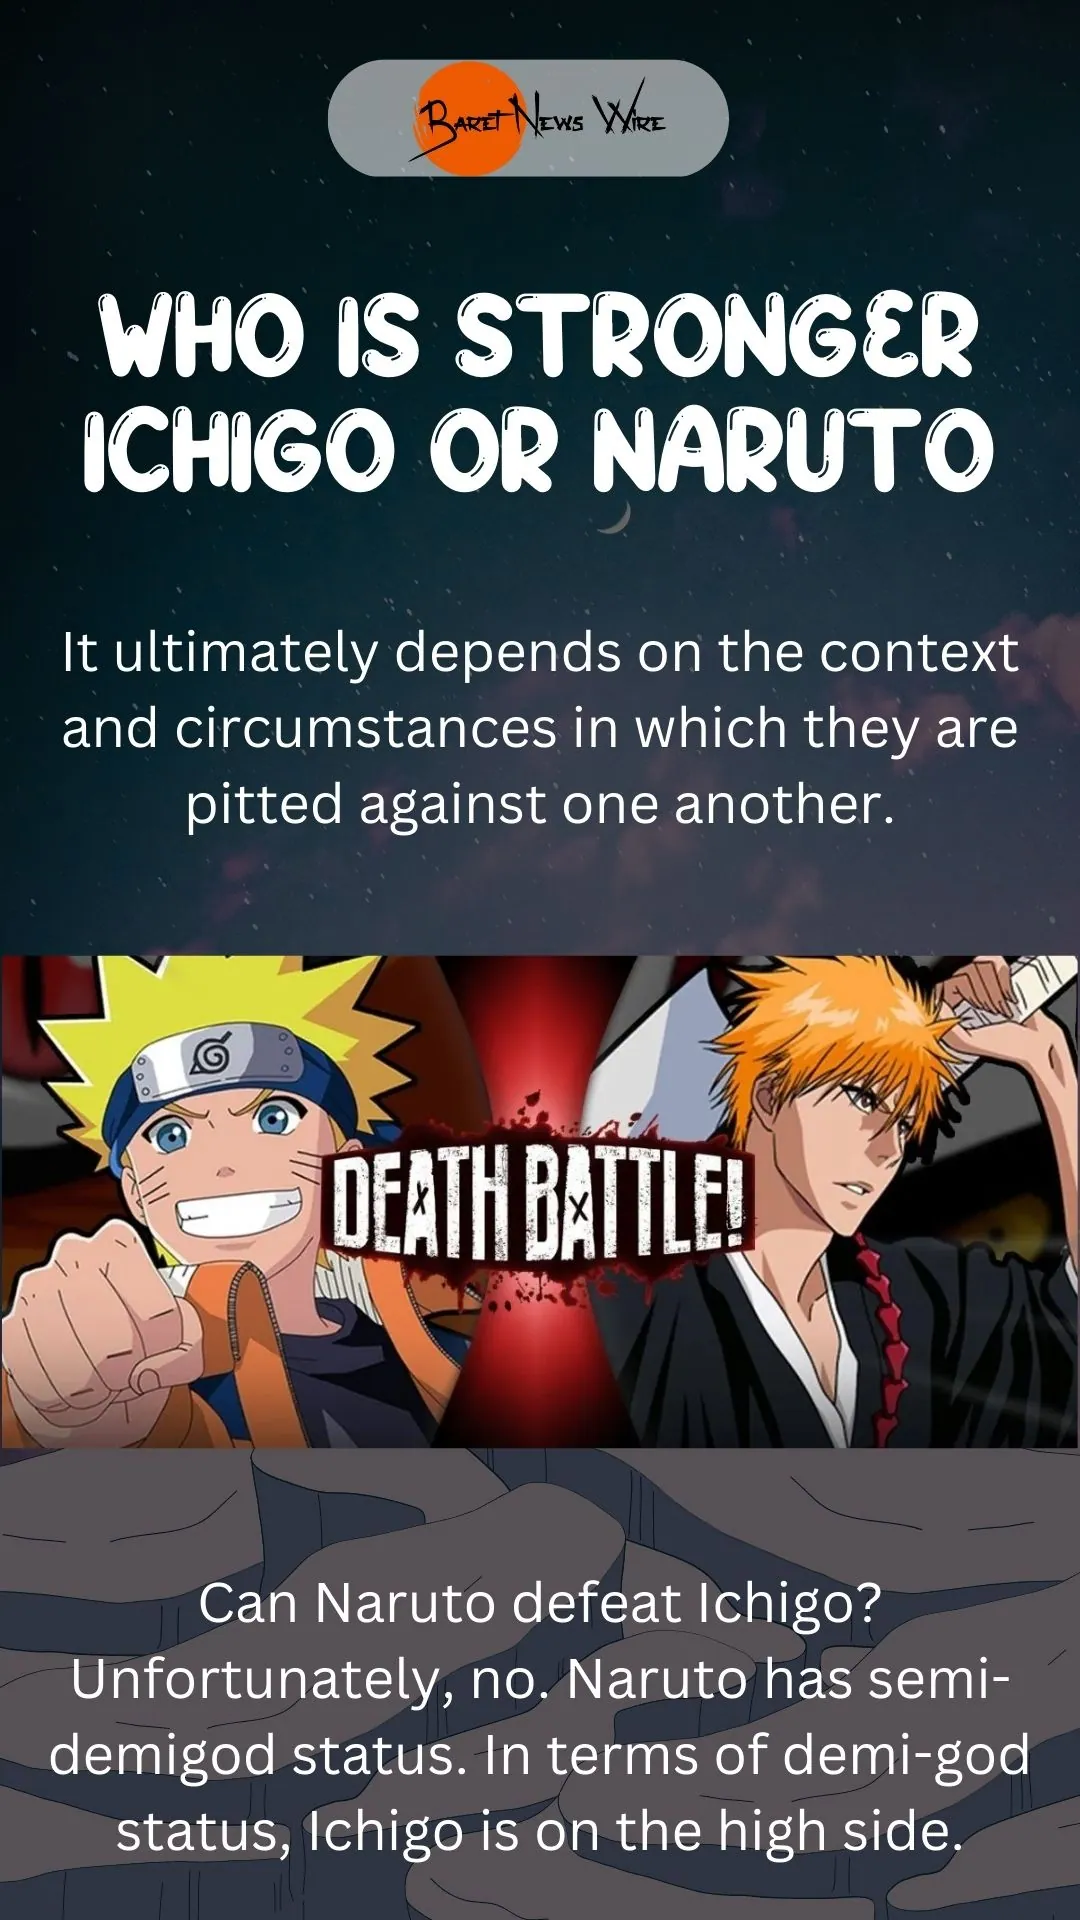 Who is stronger Ichigo or Naruto and why?